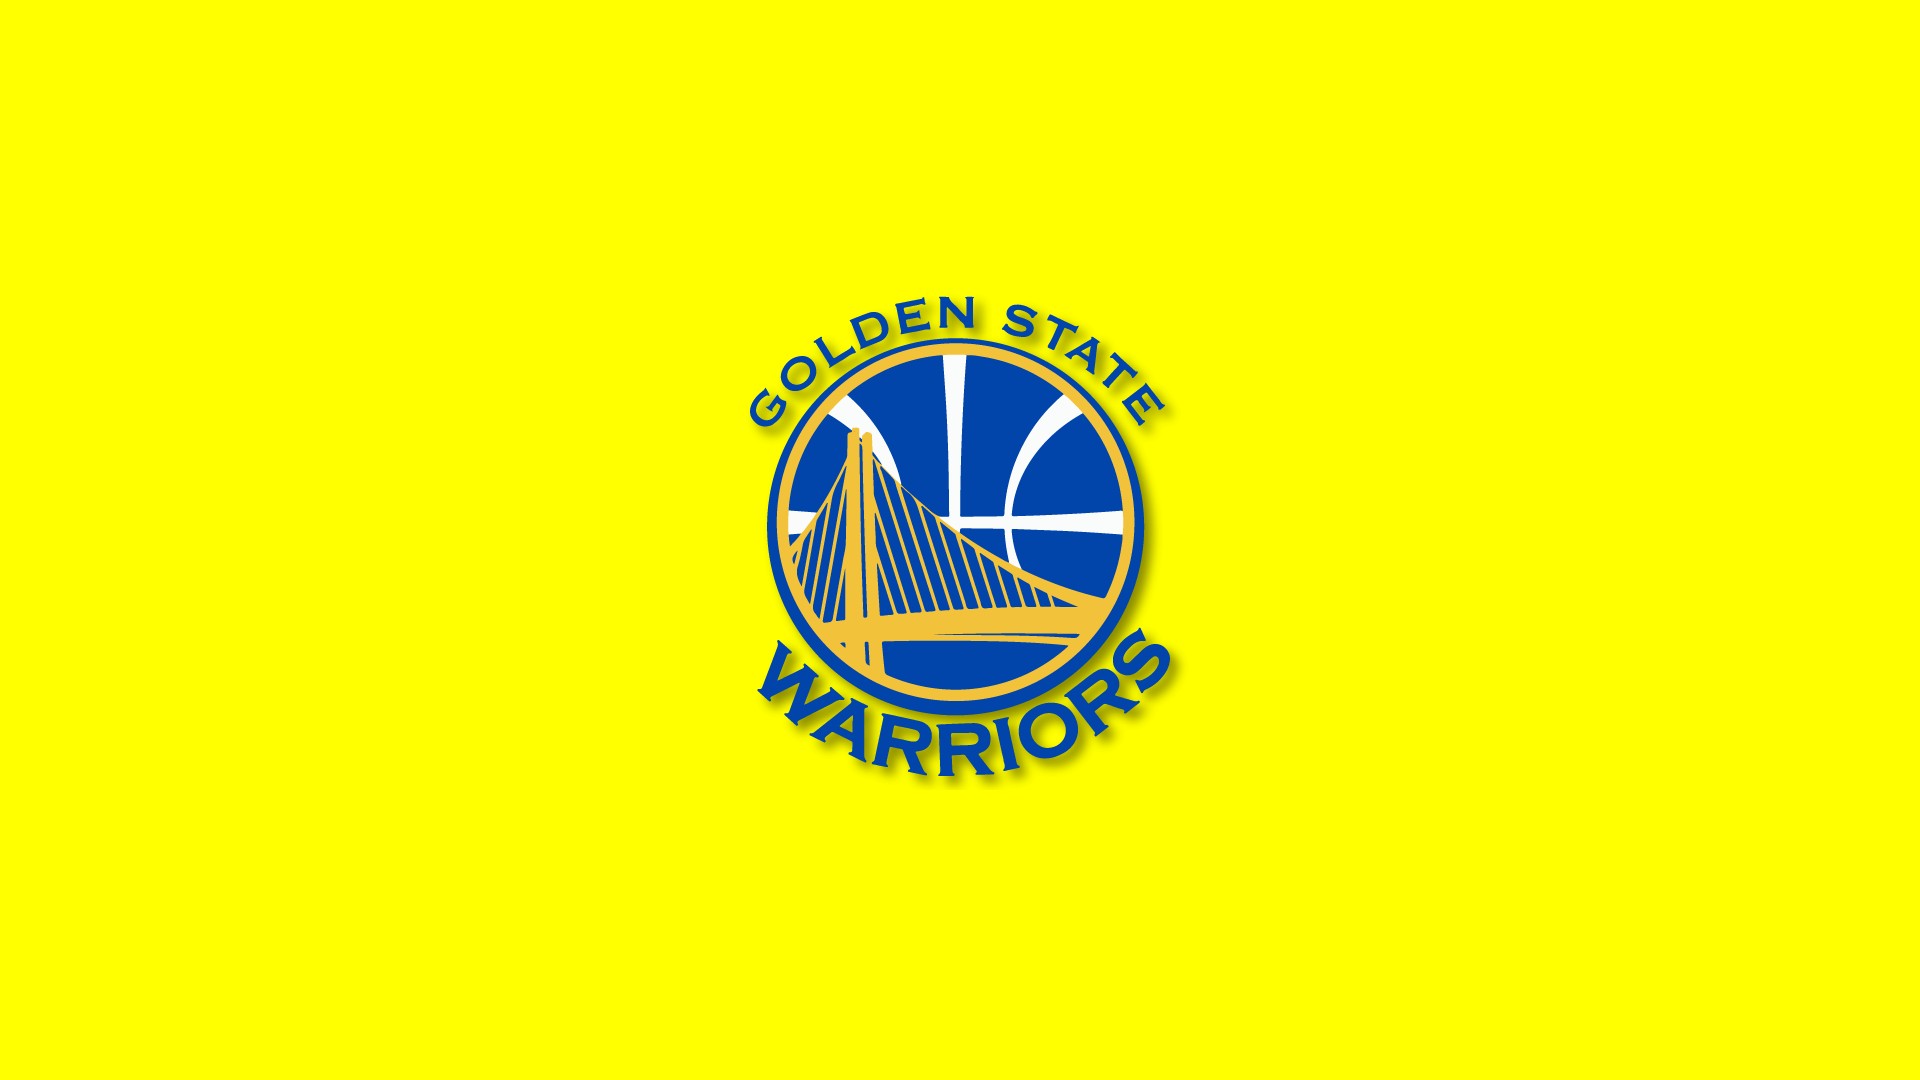 Golden State Warriors Desktop Backgrounds HD with resolution 1920X1080 pixel. You can use this wallpaper as background for your desktop Computer Screensavers, Android or iPhone smartphones